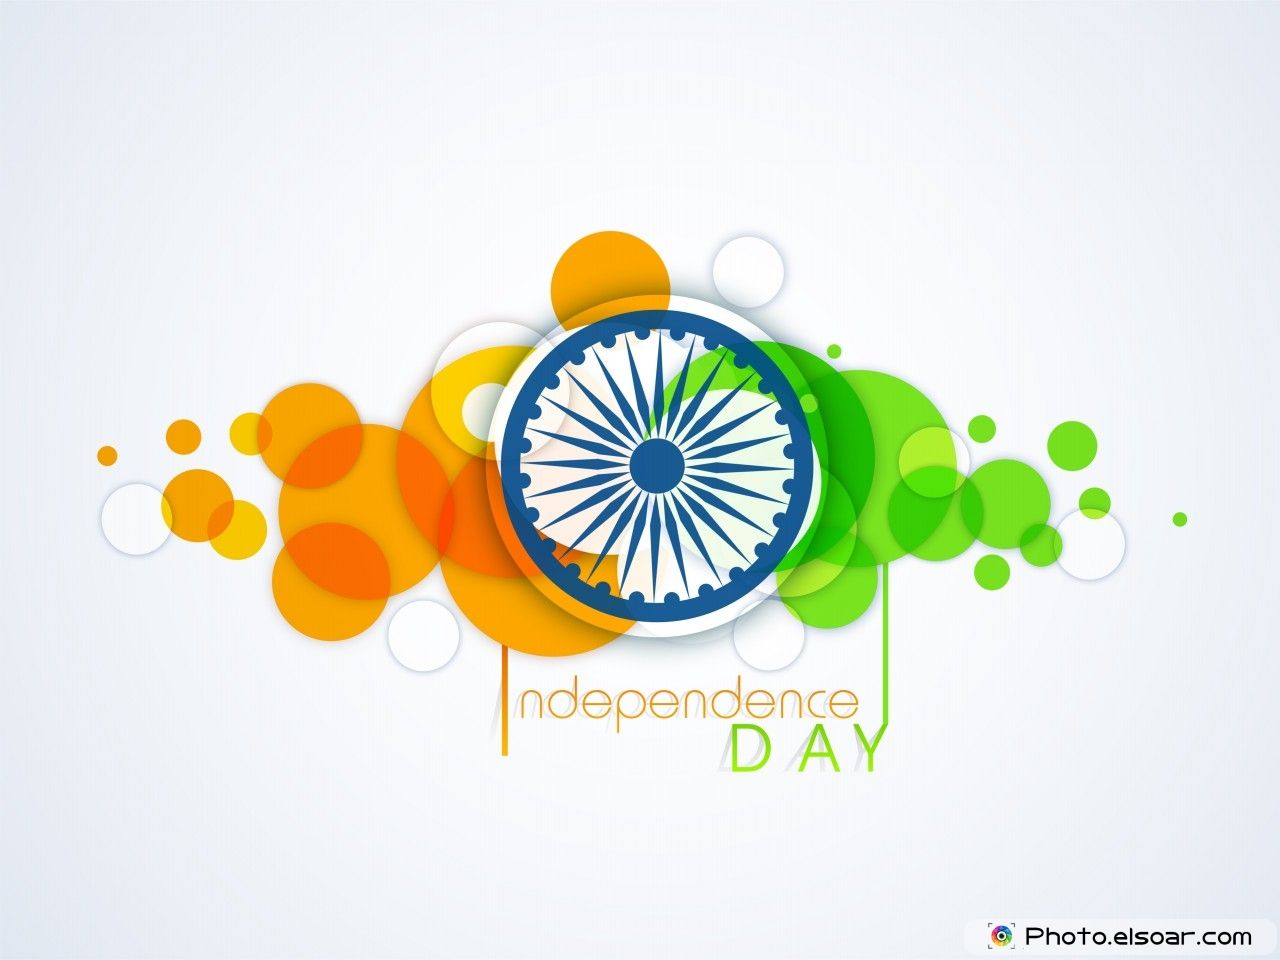 India independence day wallpapers